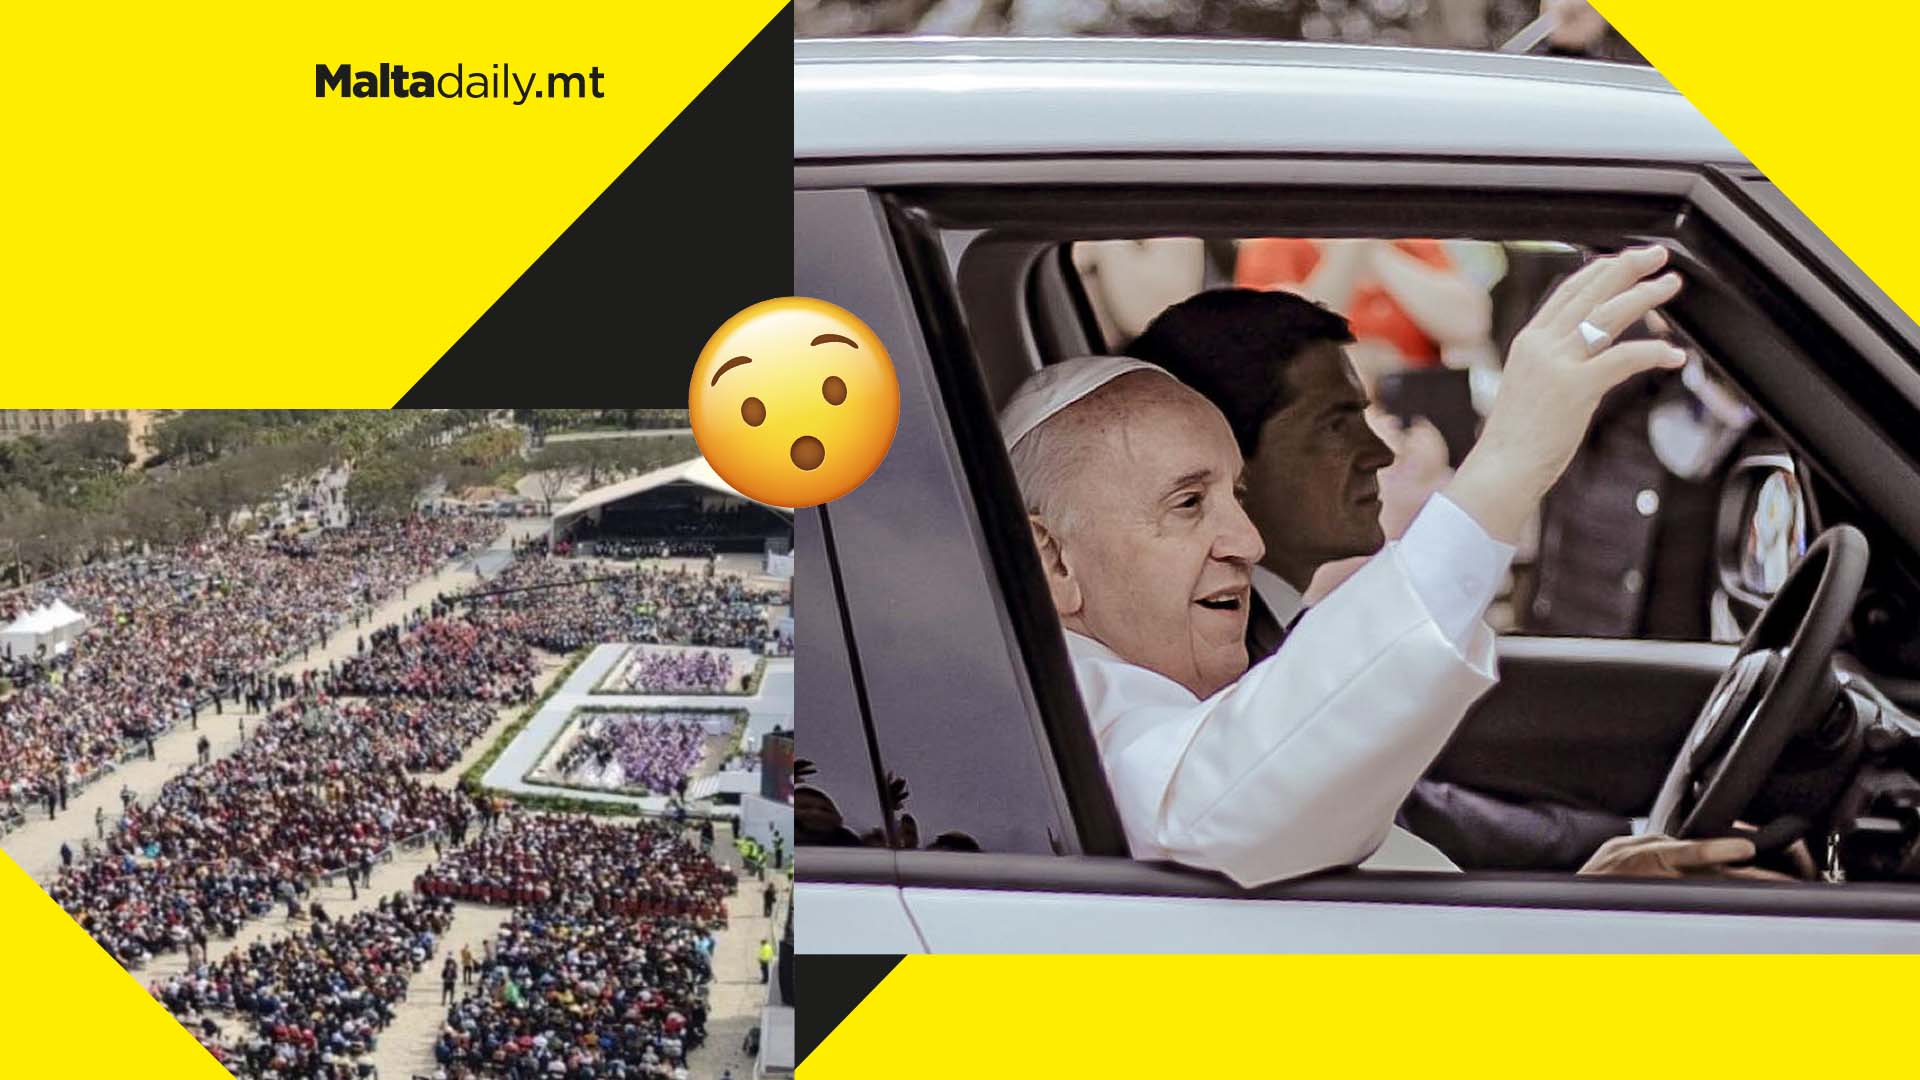 550,000 people watched live Pope visit broadcast